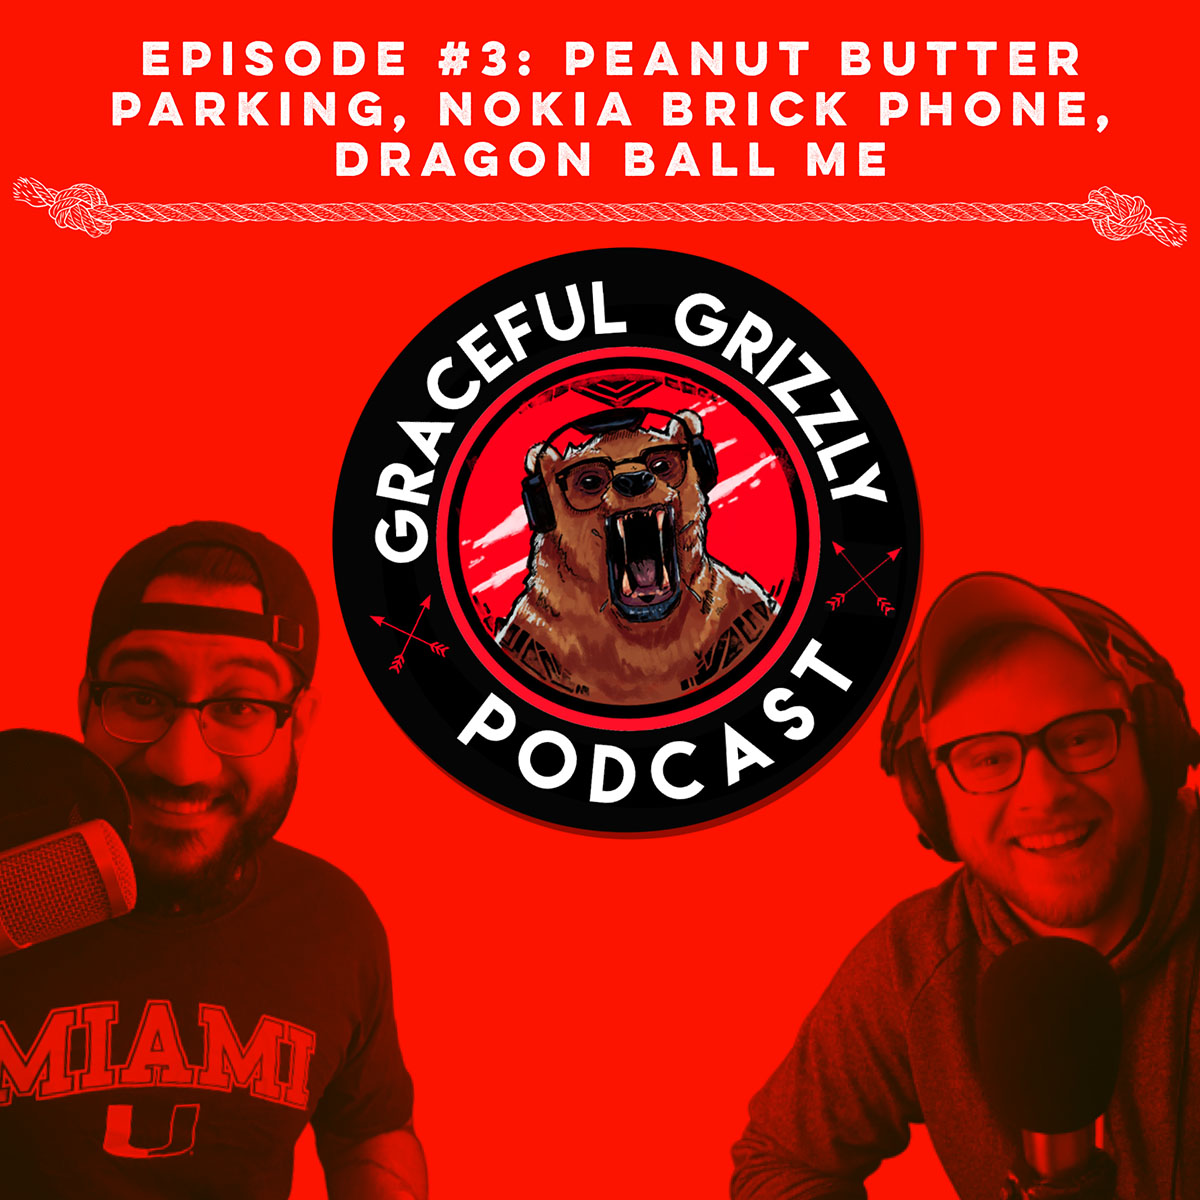 Episode 3 - Graceful Grizzly Podcast